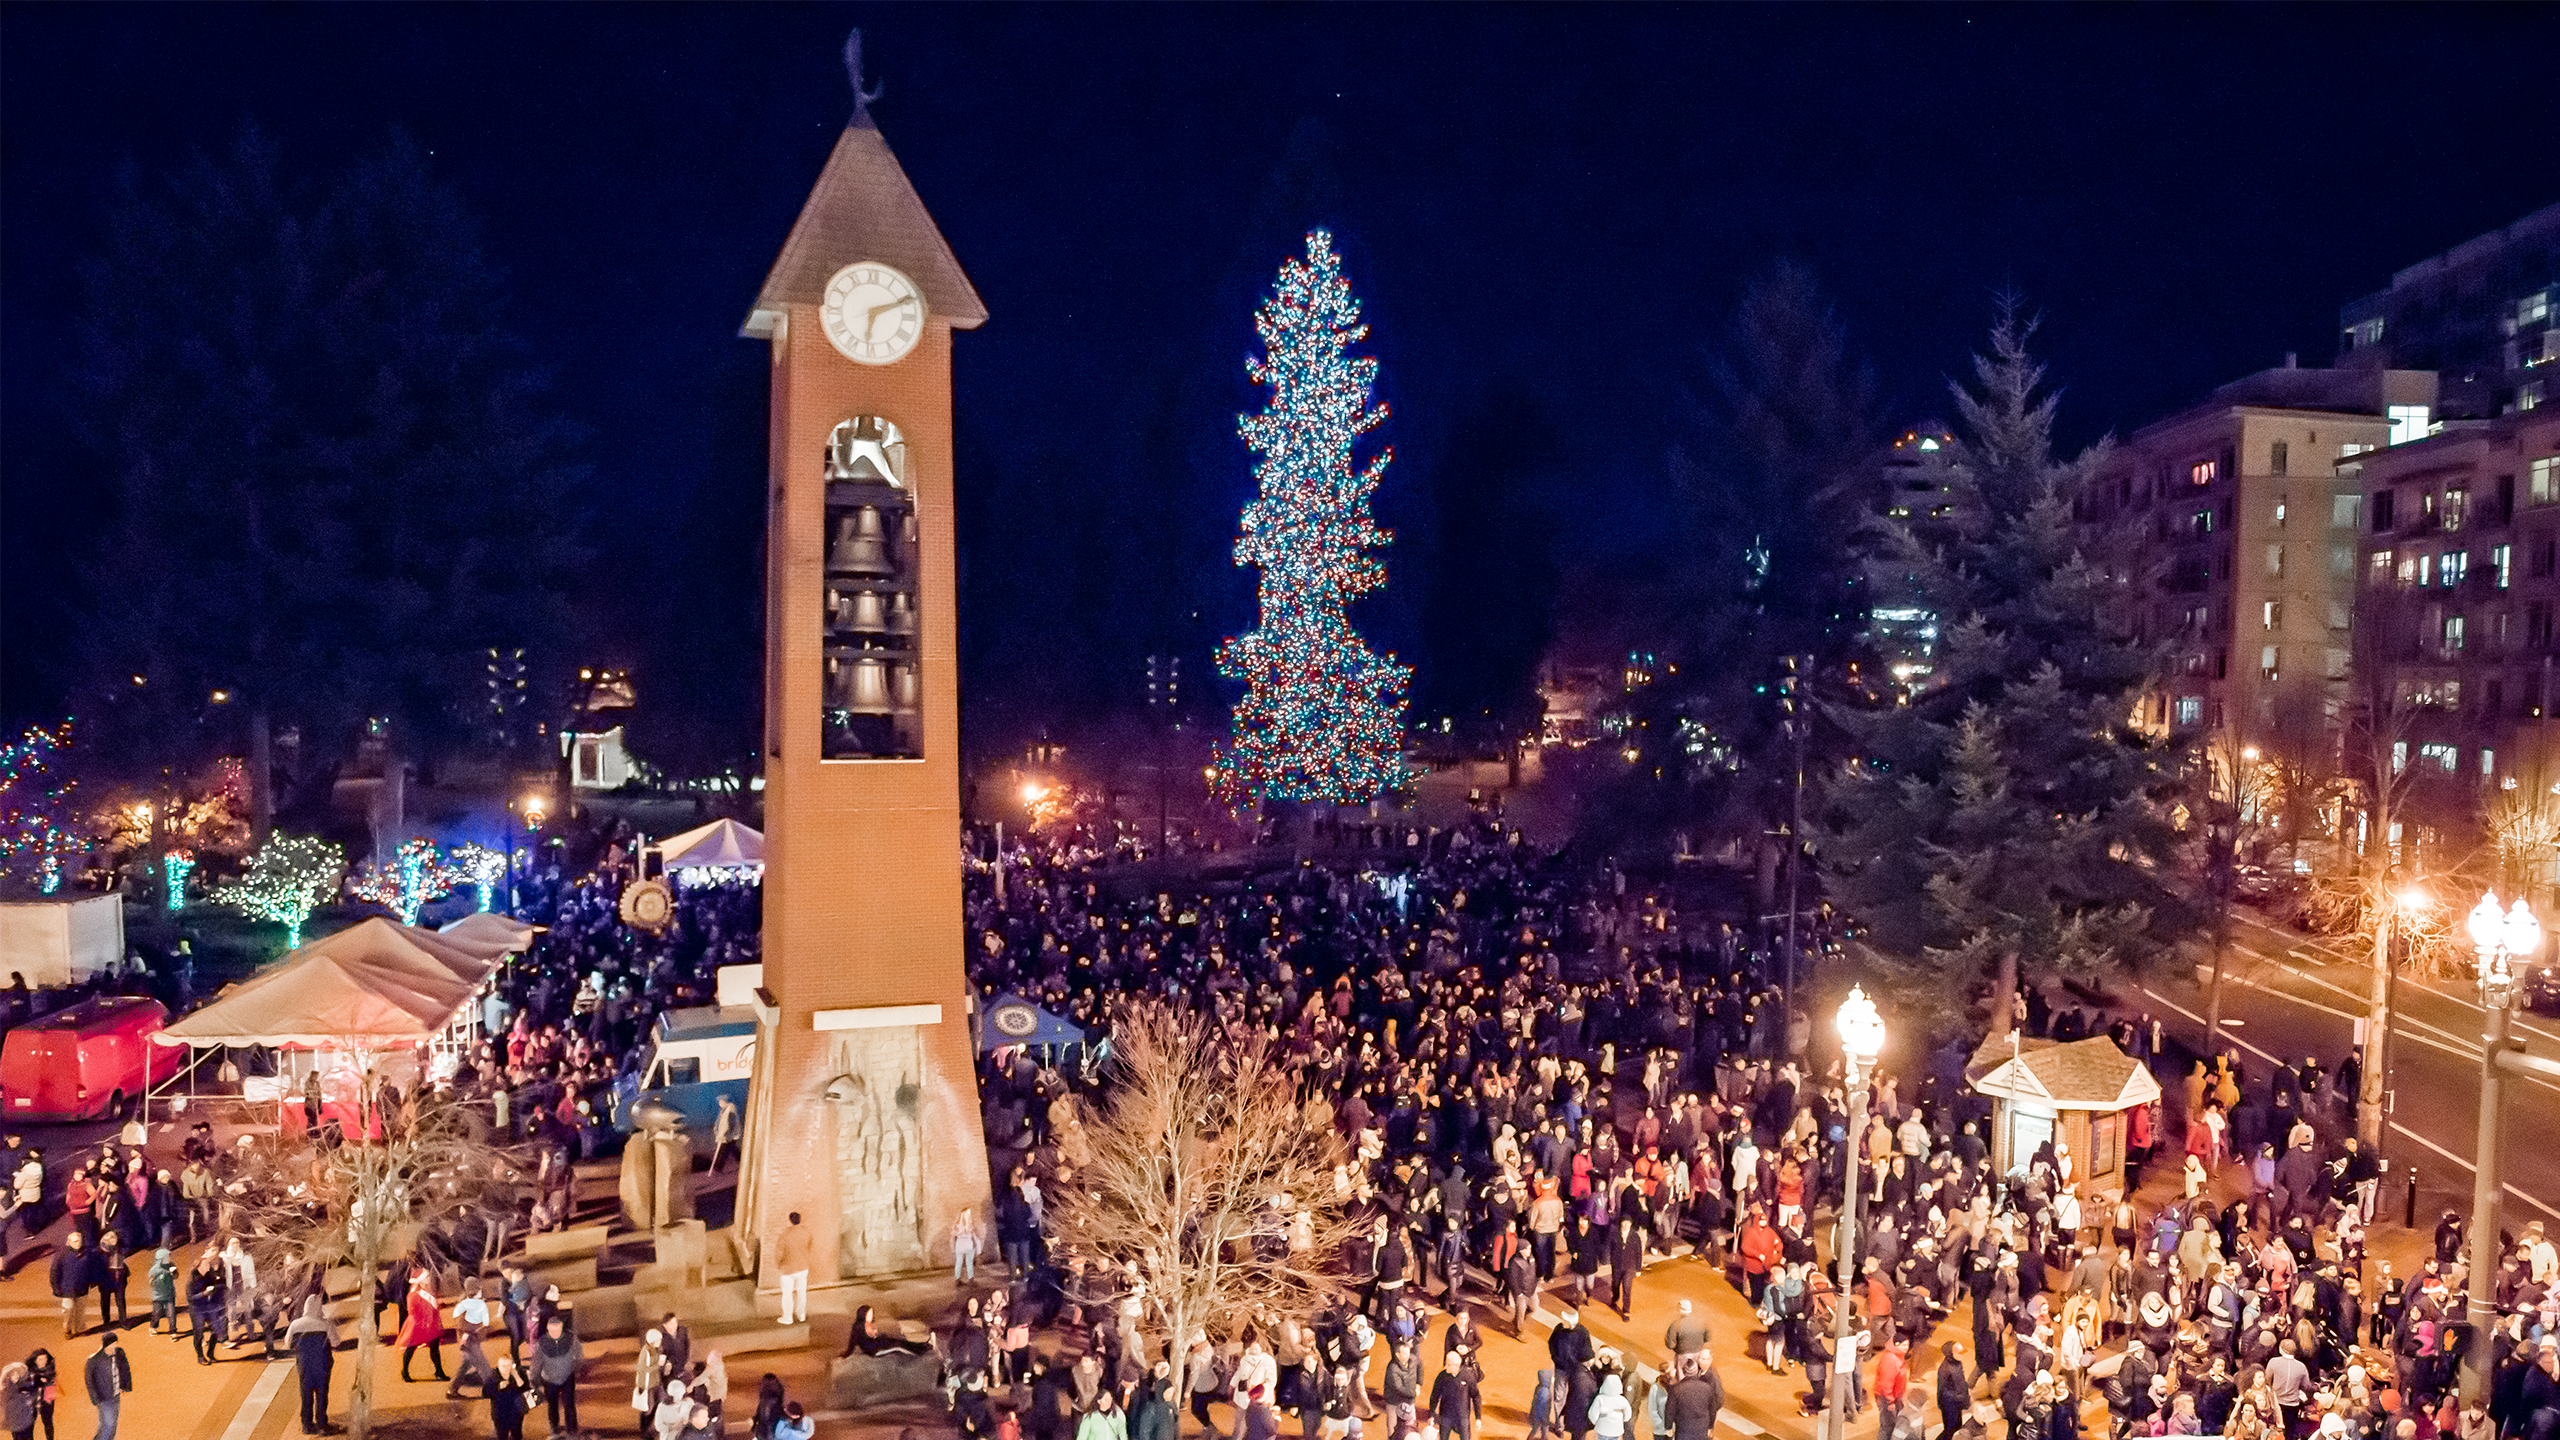 An aerial view of Propstra Square at night. It is filled with people, the clock tower in the foreground and a lit holiday tree in the background.